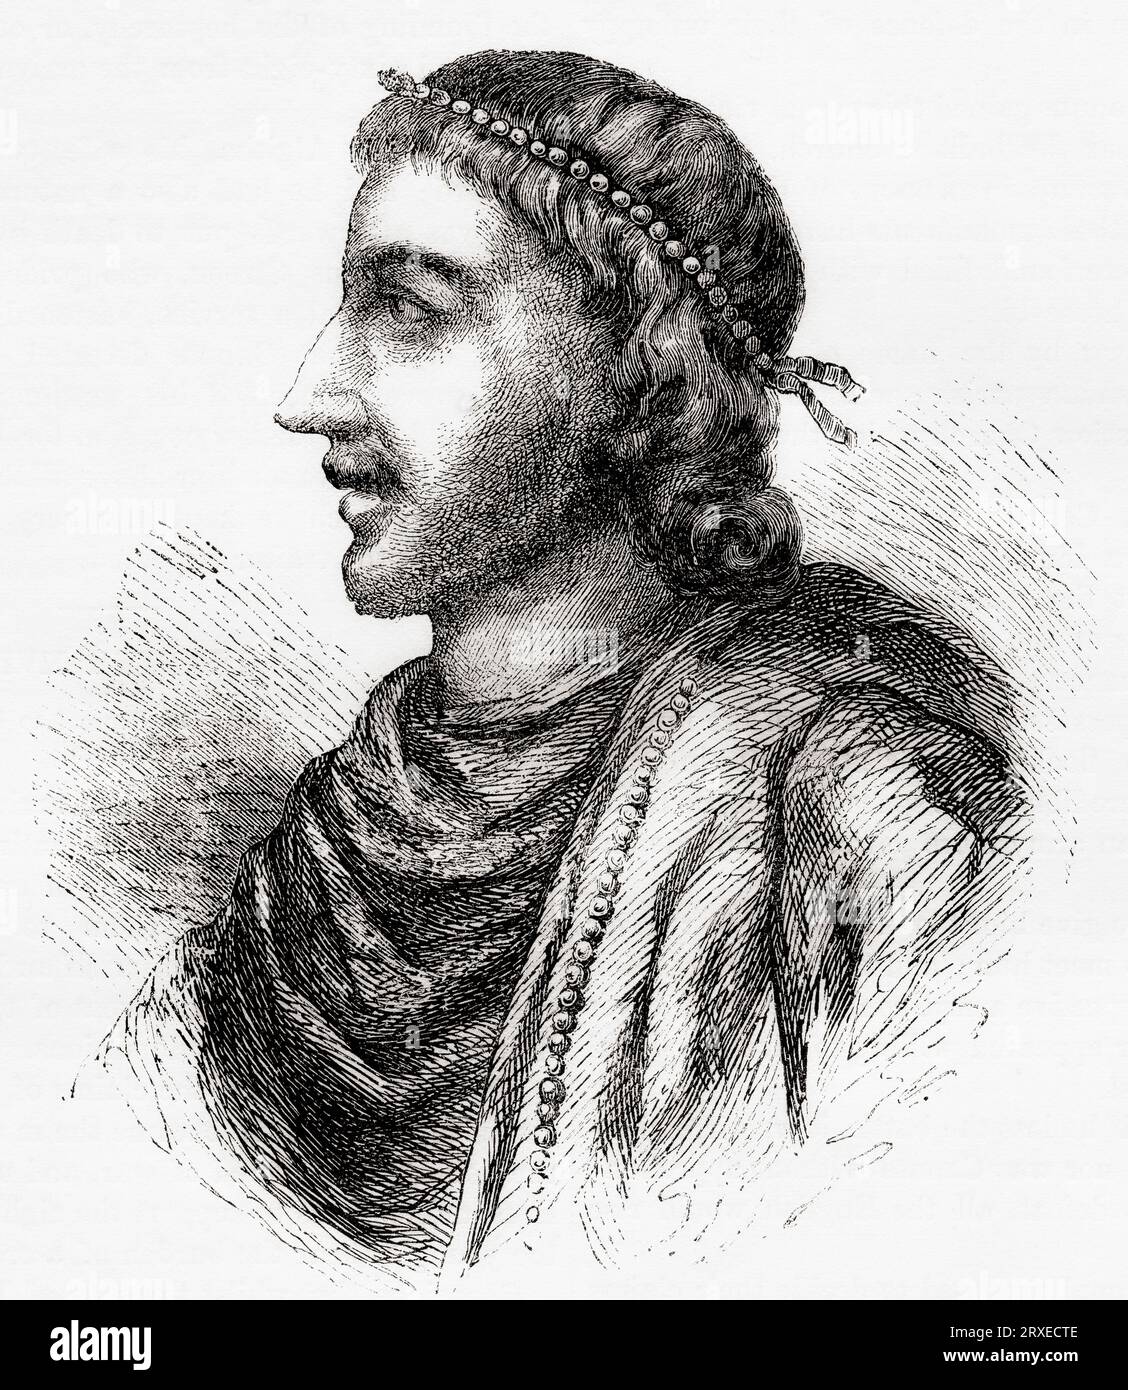 Cnut, c. 990 – 1035, aka Cnut the Great and Canute. King of England from 1016, King of Denmark from 1018, and King of Norway from 1028 until his death in 1035.  From Cassell's Illustrated History of England, published 1857. Stock Photo